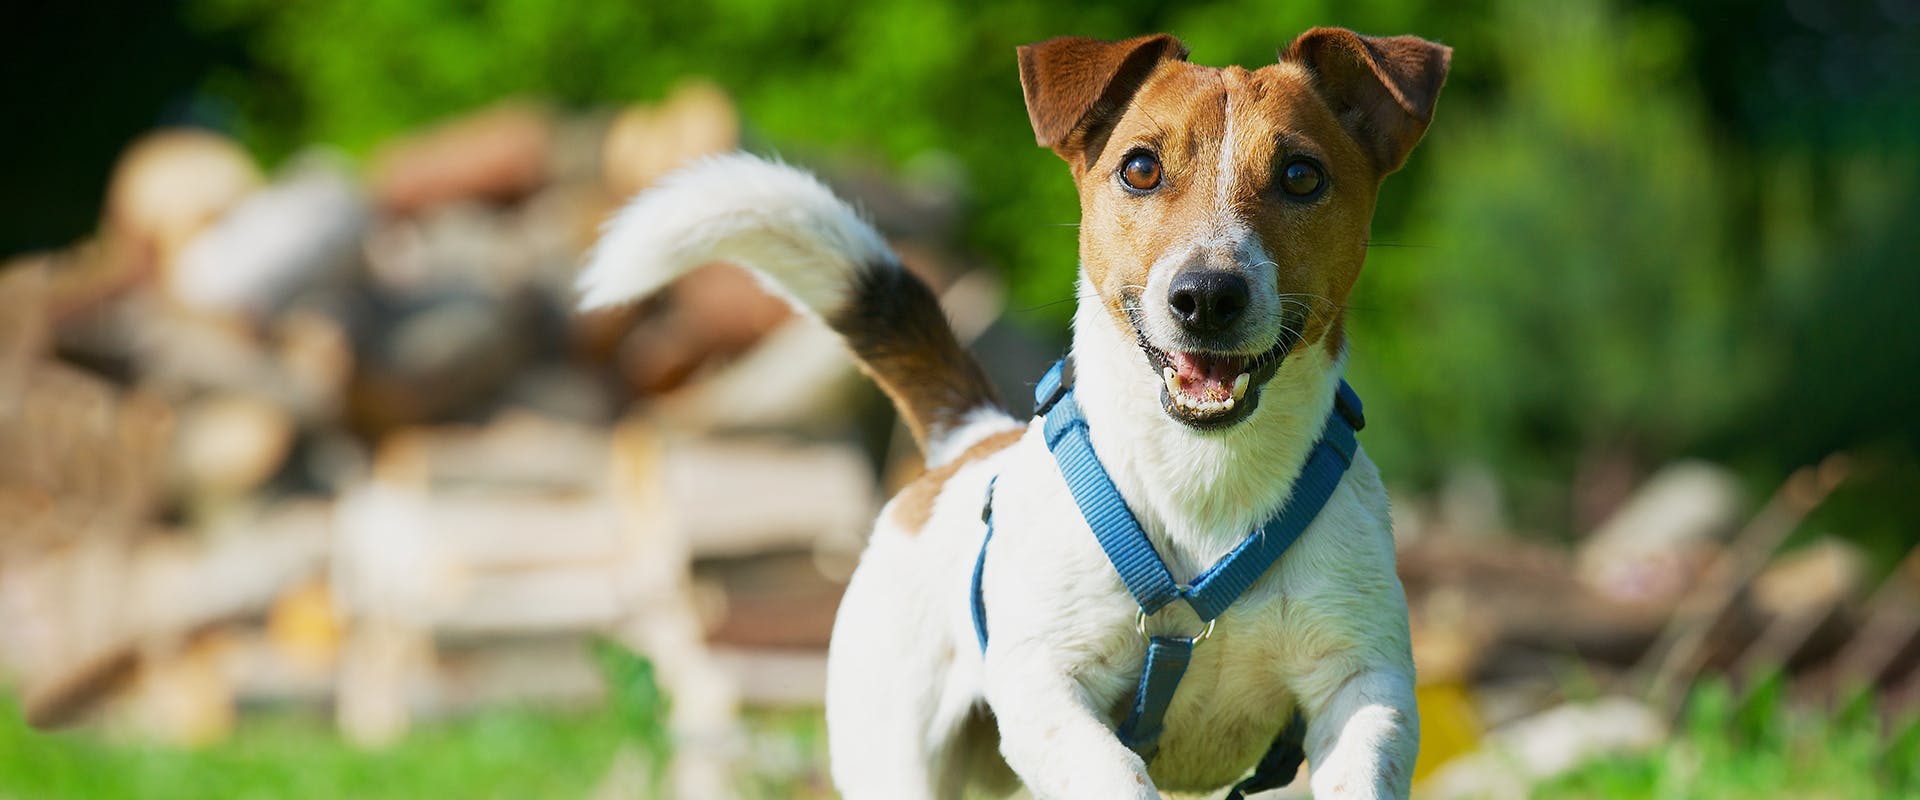 A happy Jack Russell dog running, wearing a blue small dog harness